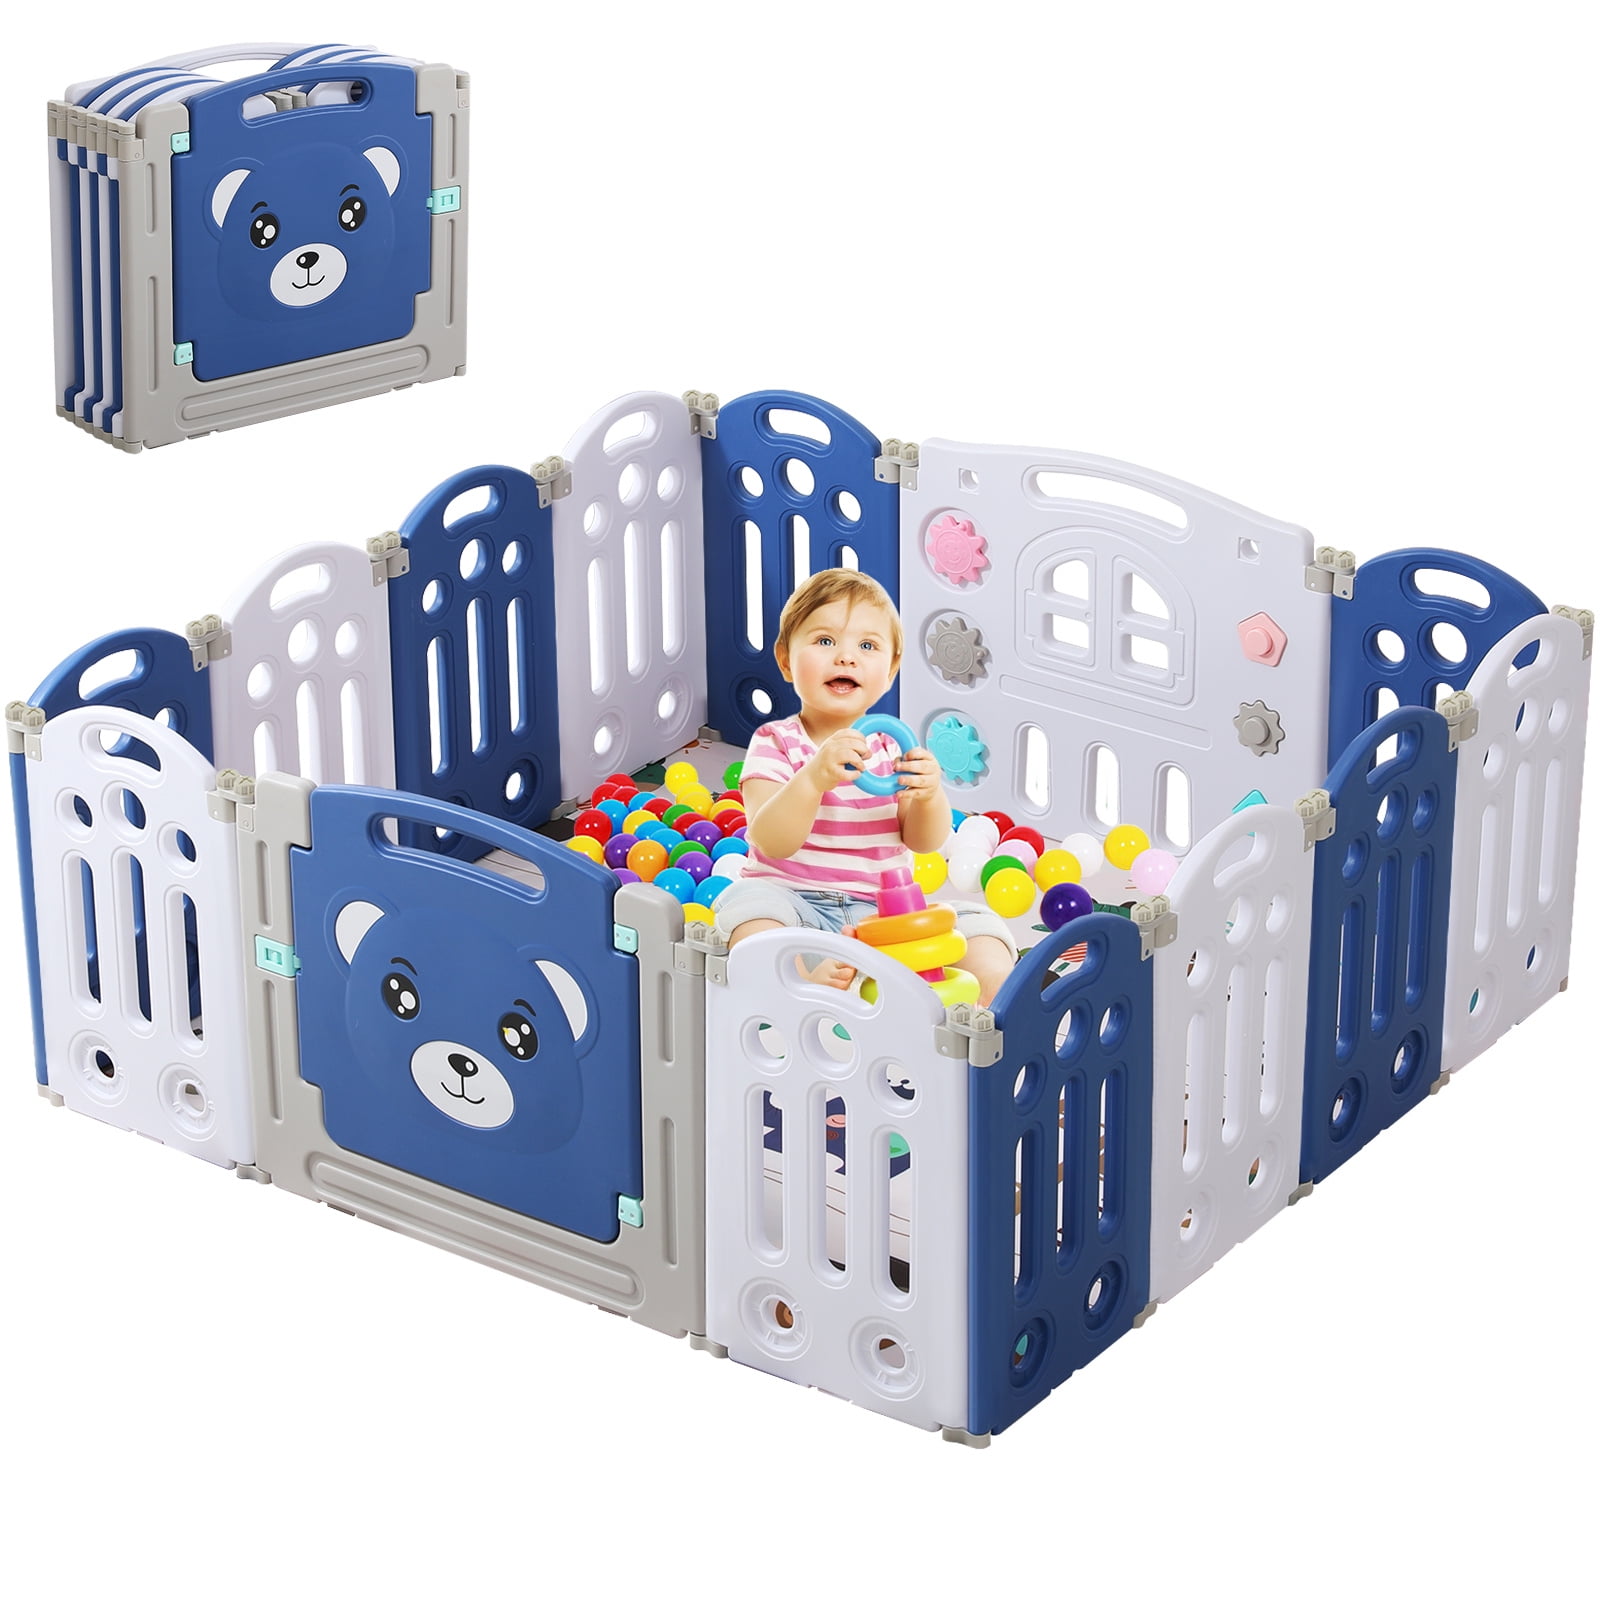 Amictoy Foldable Kids Activity Centre Toddler Safety Play Yard Fence Gate Home Indoor Outdoor（14 Panel） Blue Baby Playpen 